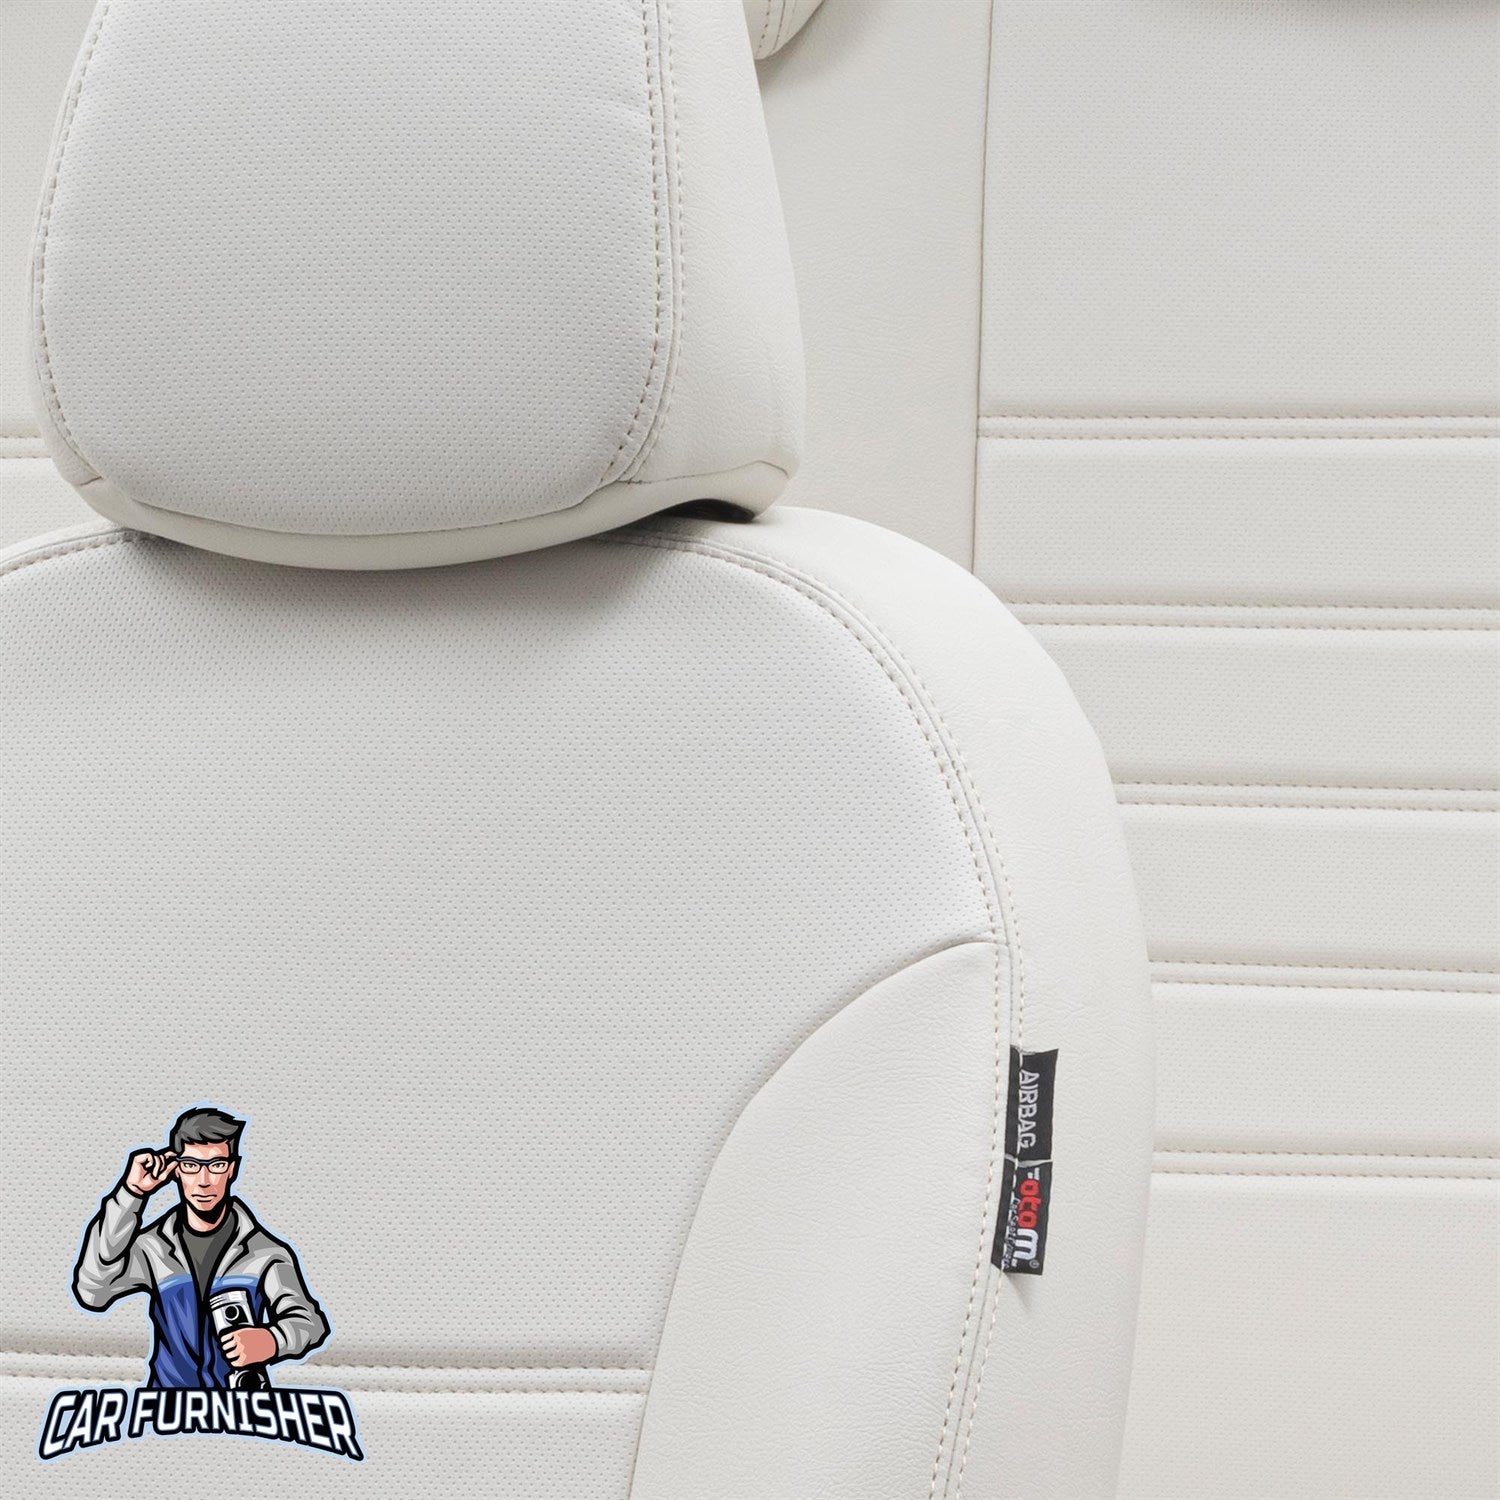 Nissan Qashqai Seat Covers Istanbul Leather Design Ivory Leather